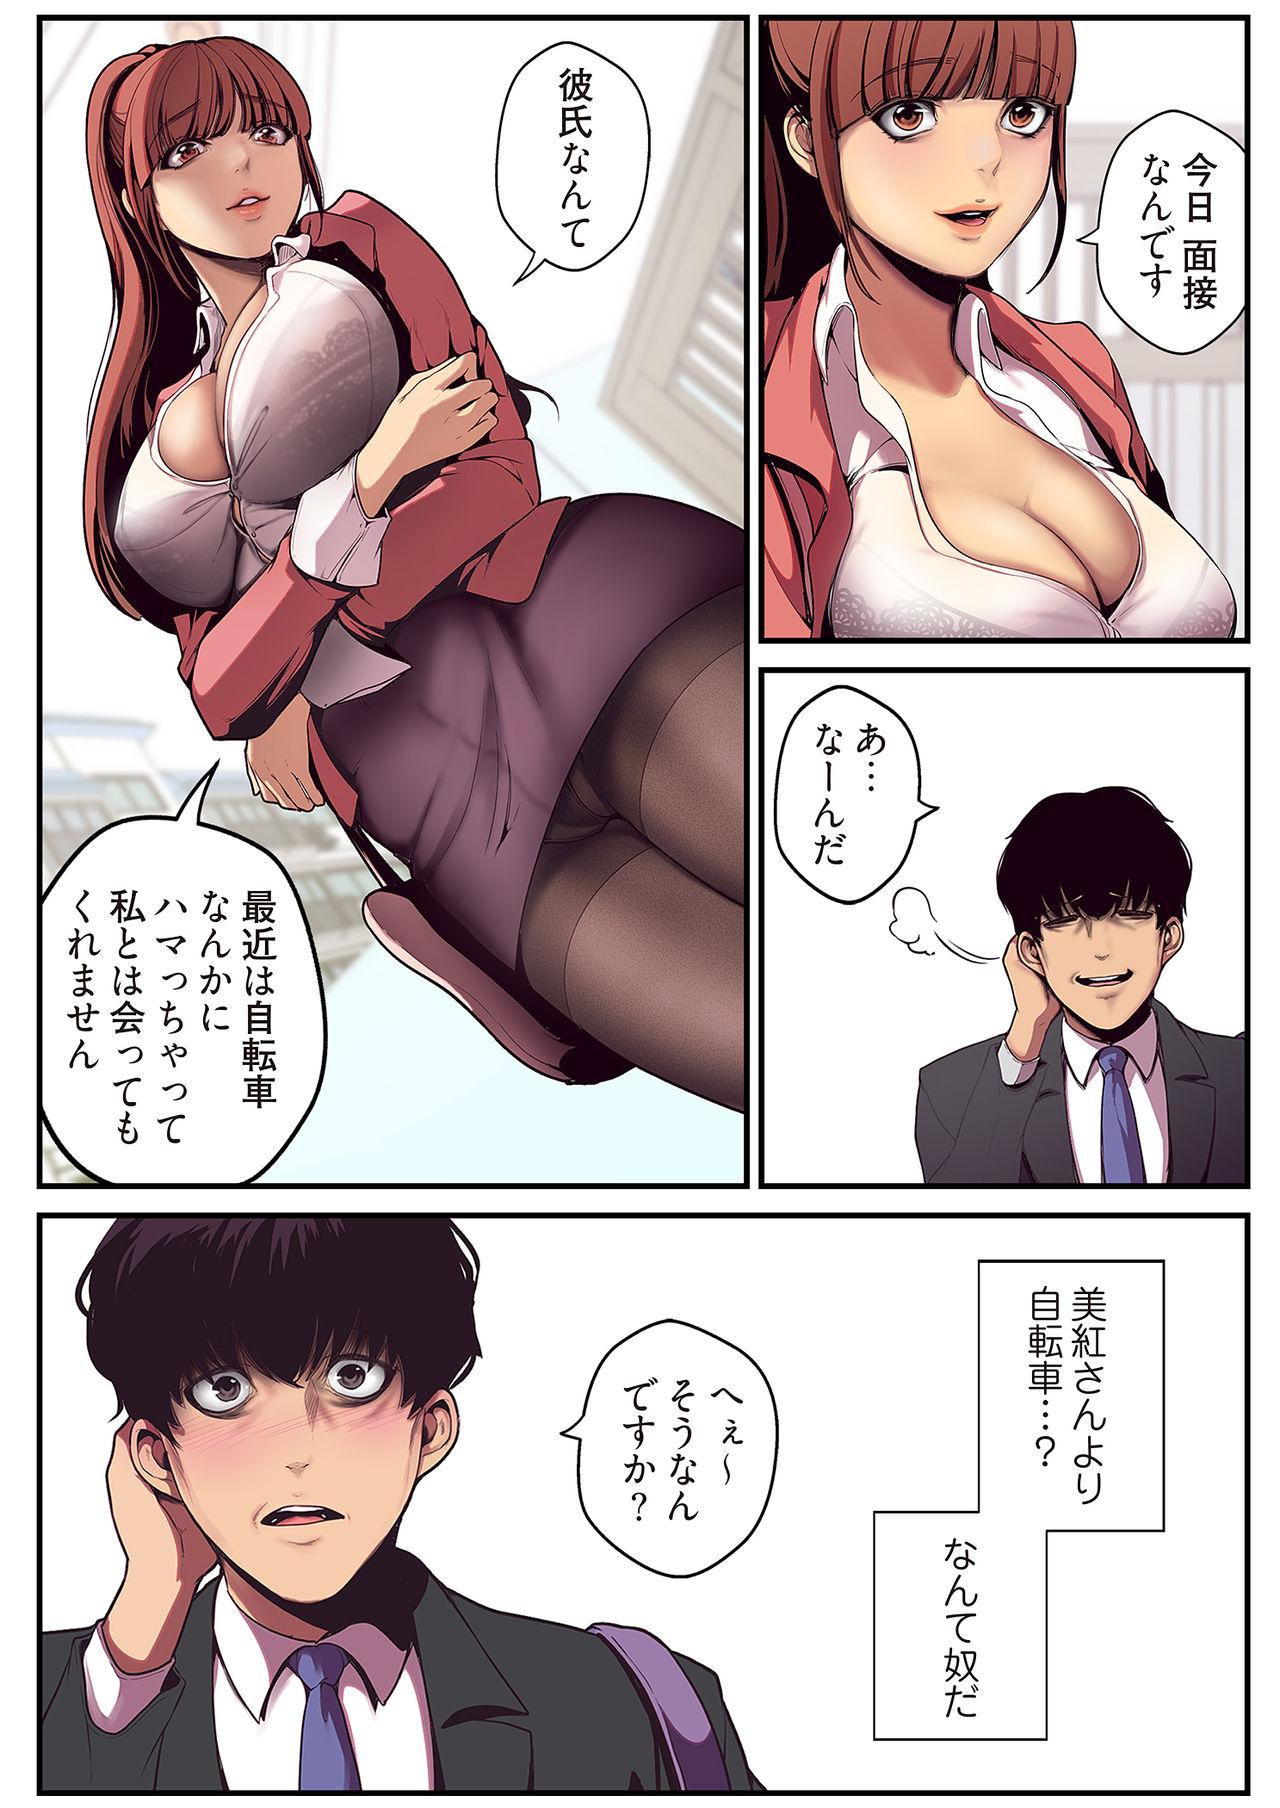 Doggystyle すばらしき新世界 01-03 Lesbians - Page 10